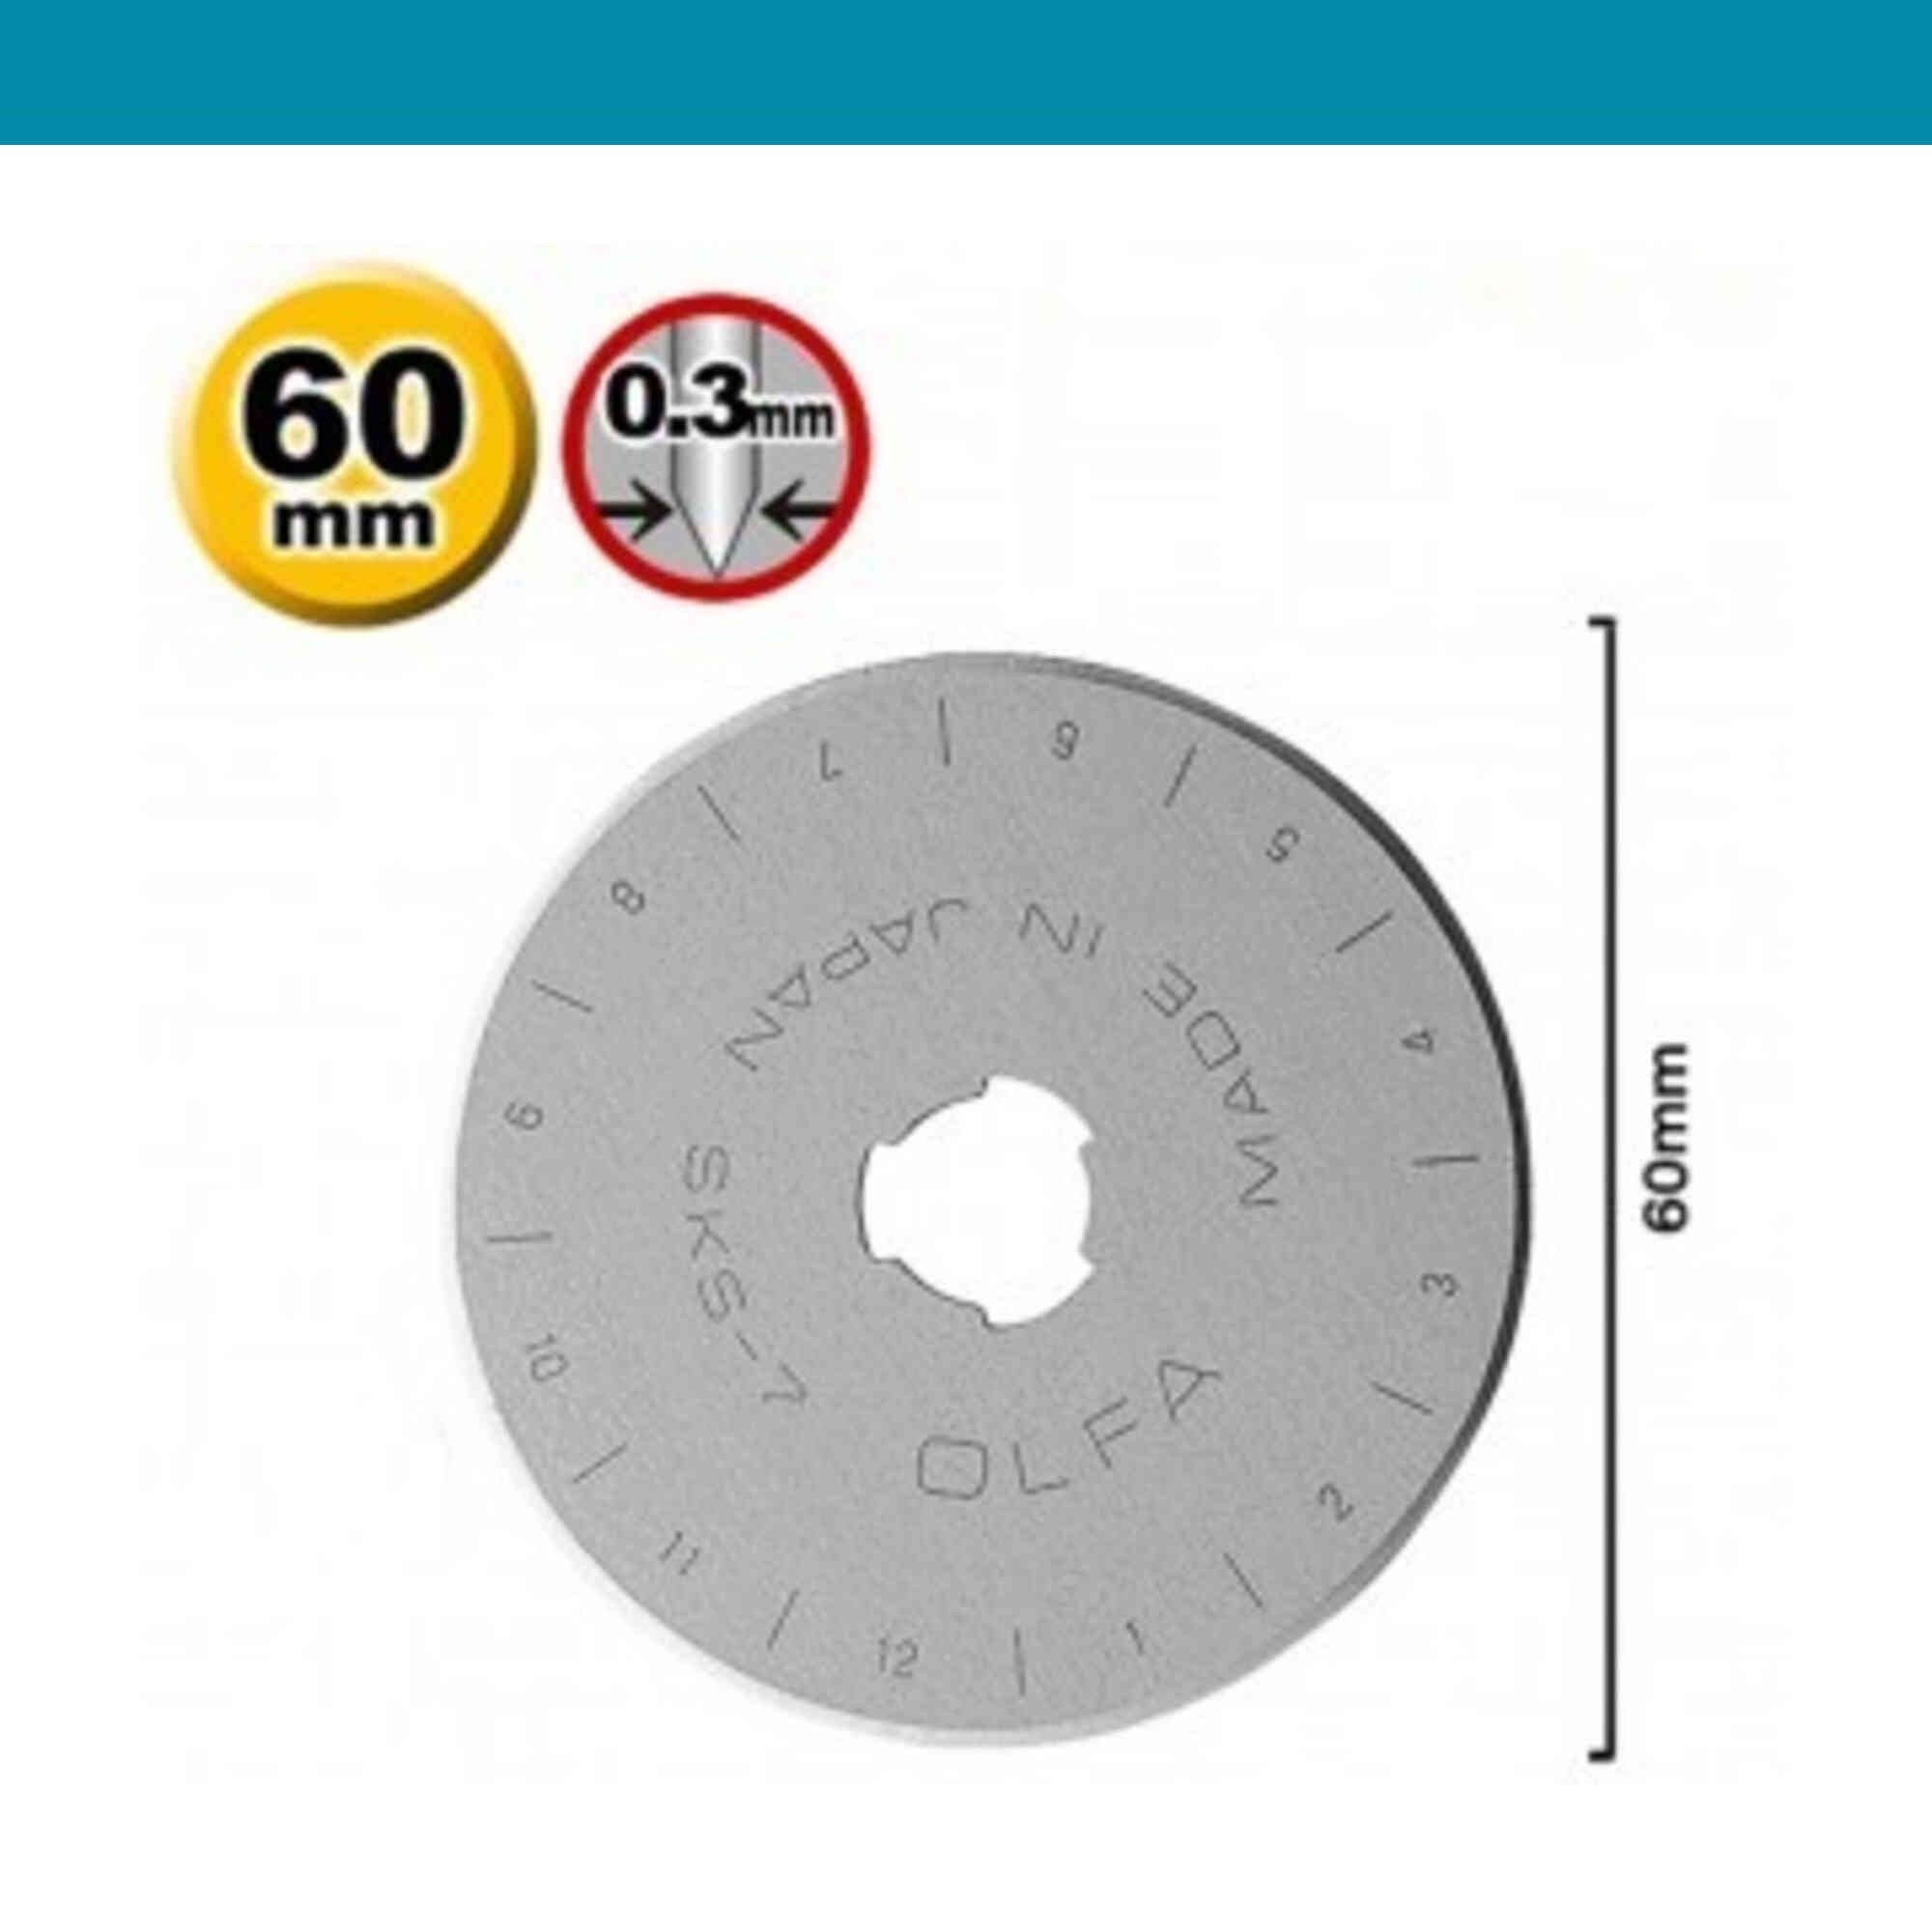 Olfa 60mm blades for Rotary Cutter large